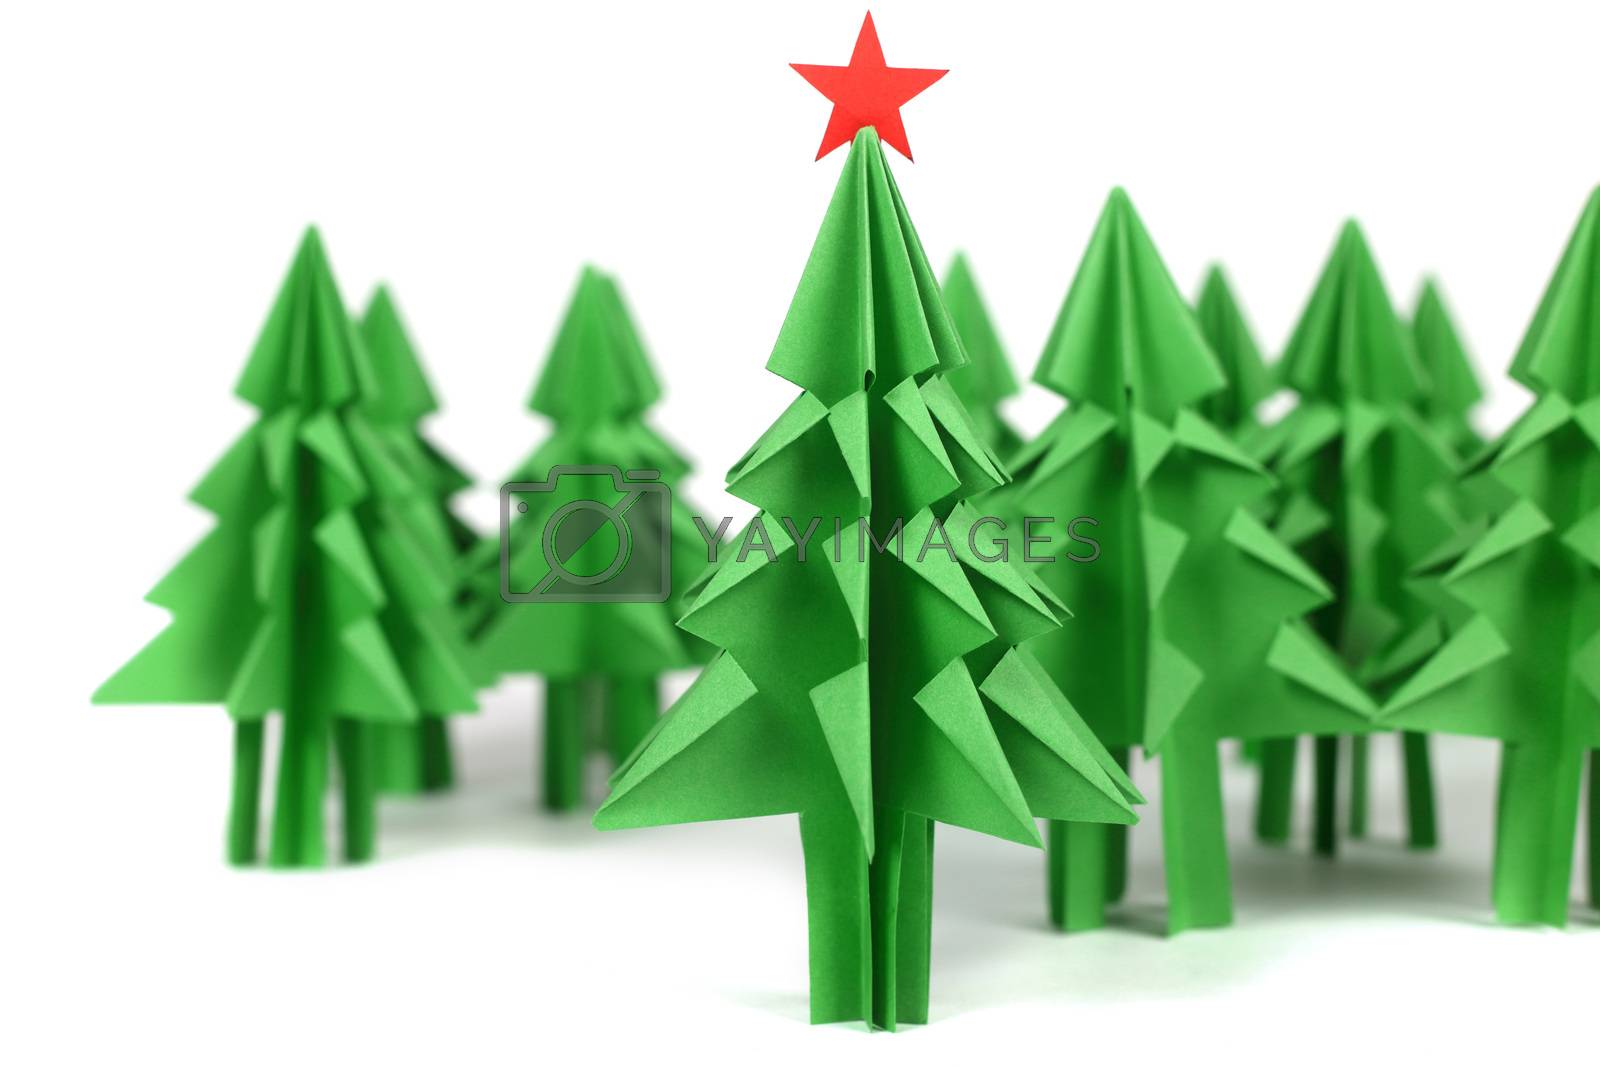 Royalty free image of Origami Christmas trees by destillat